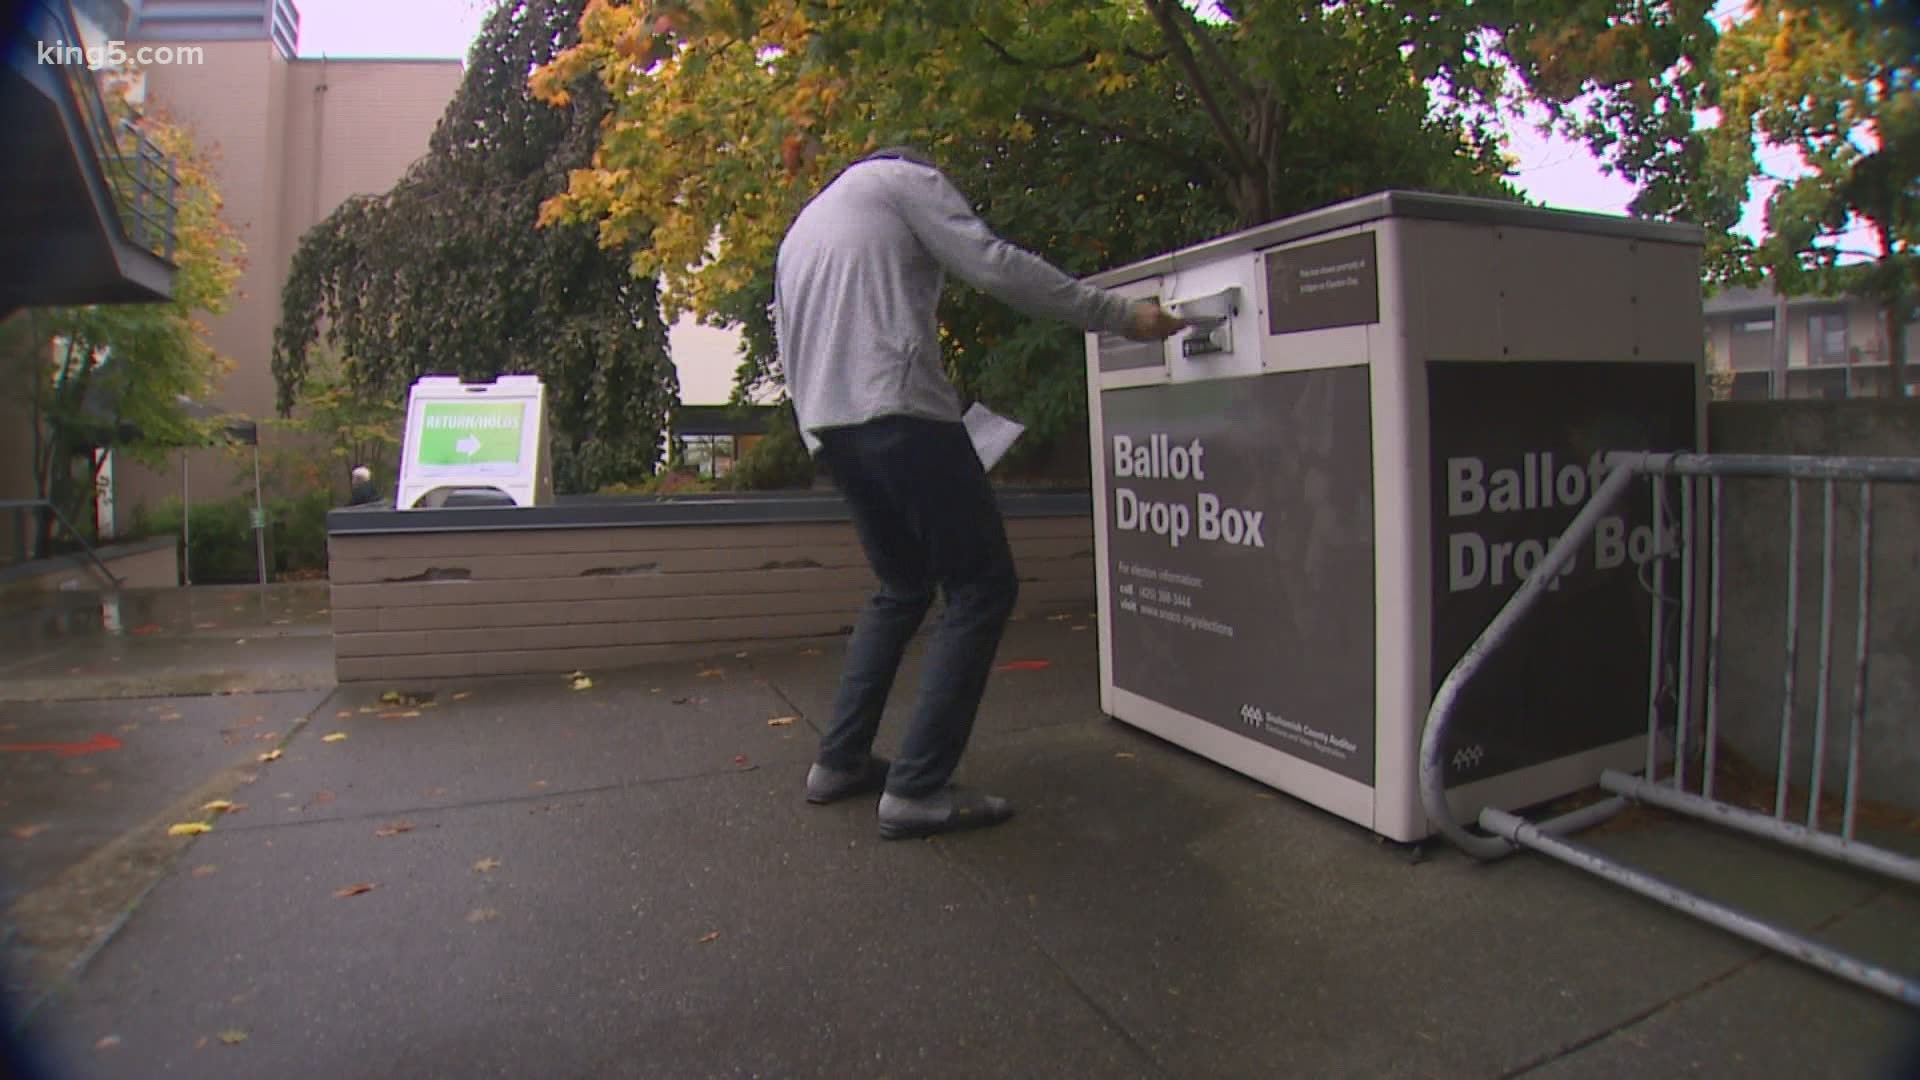 Ballots boxes in around western Washington have been buzzing the last few days as voters rush to return ballots early.